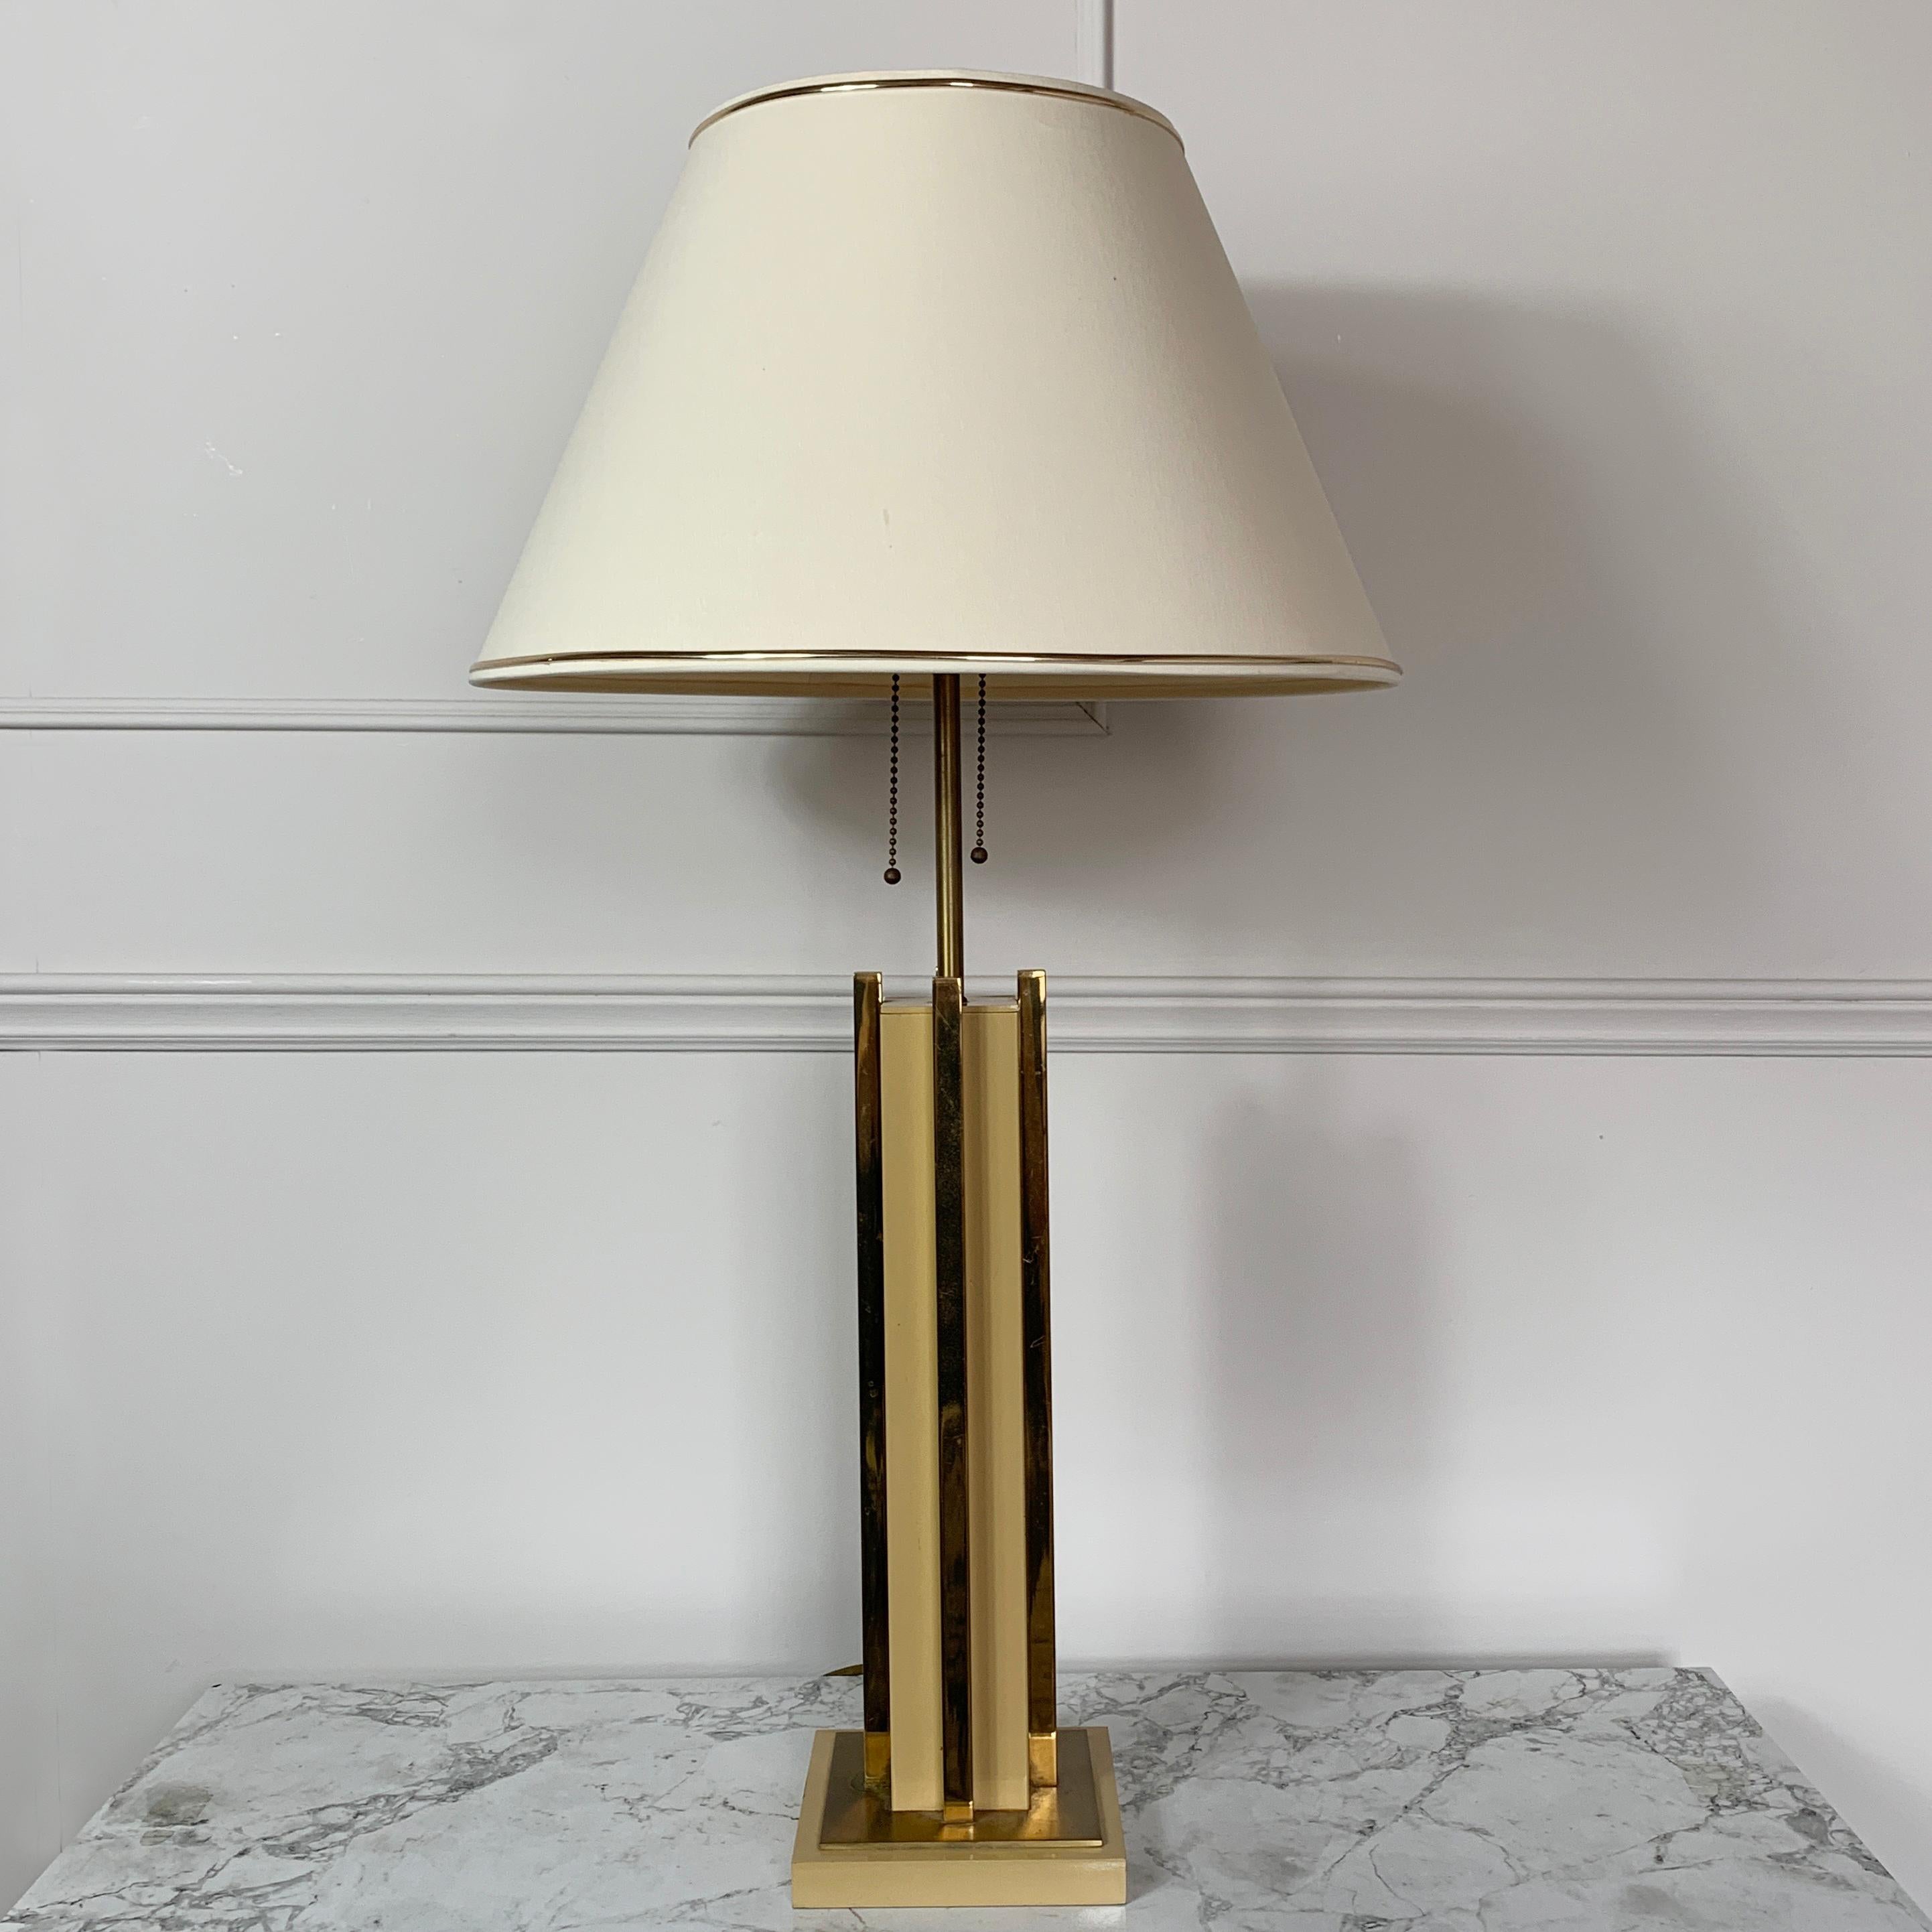 Français 1970 Willy Rizzo Attributed Gold Table Lamp (lampe de table en or) en vente